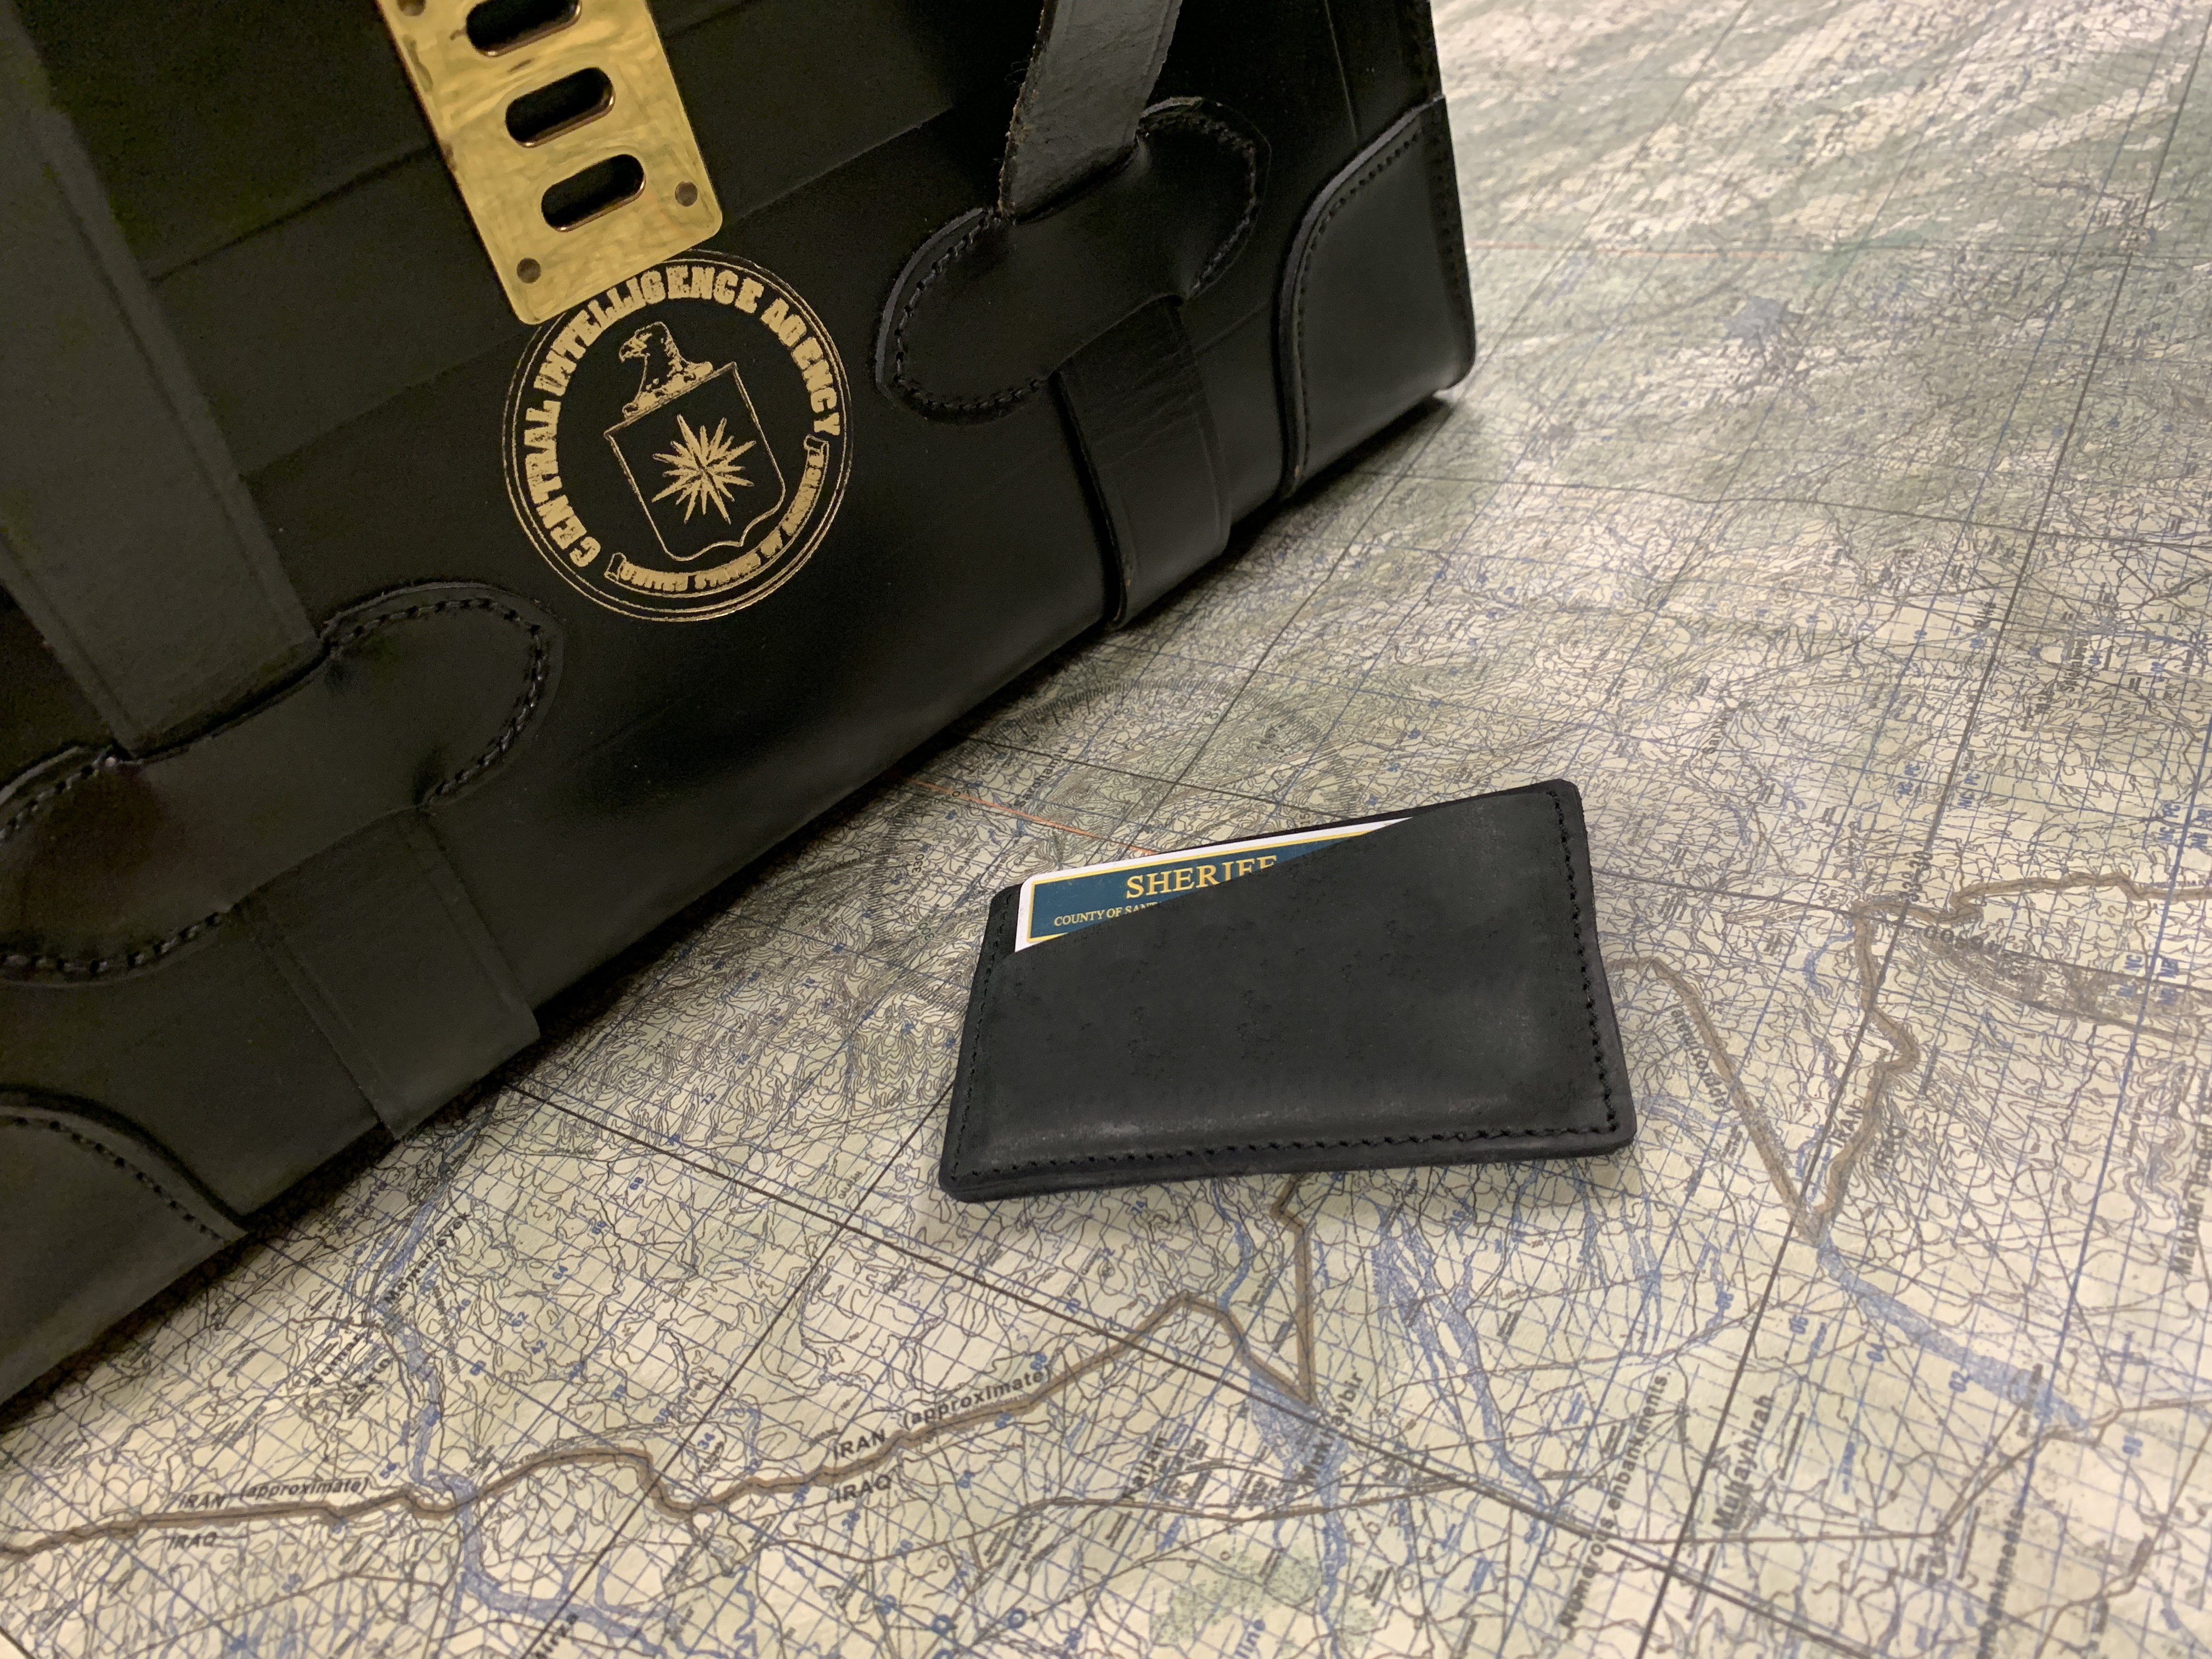 Leather Essentialism - Dual Pocket Wallet - CountyComm